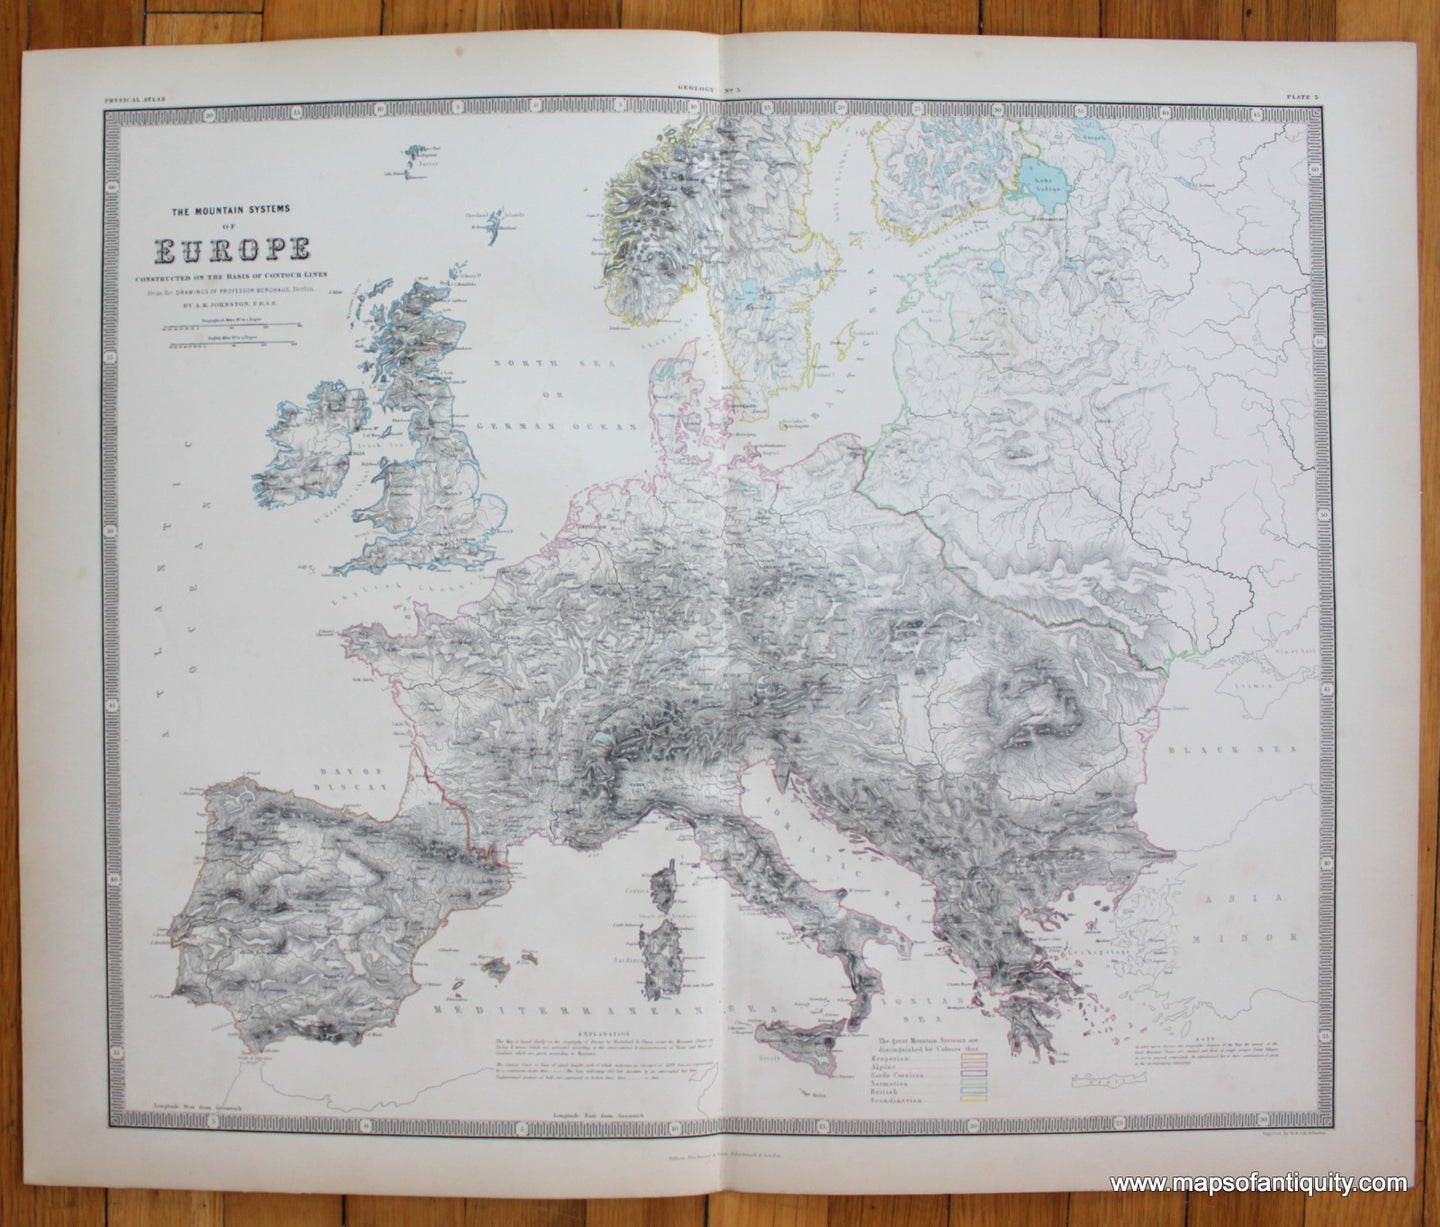 Mountain-Systems-Map-Europe-Johnston-1856-Antique-Map-1850s-1800s